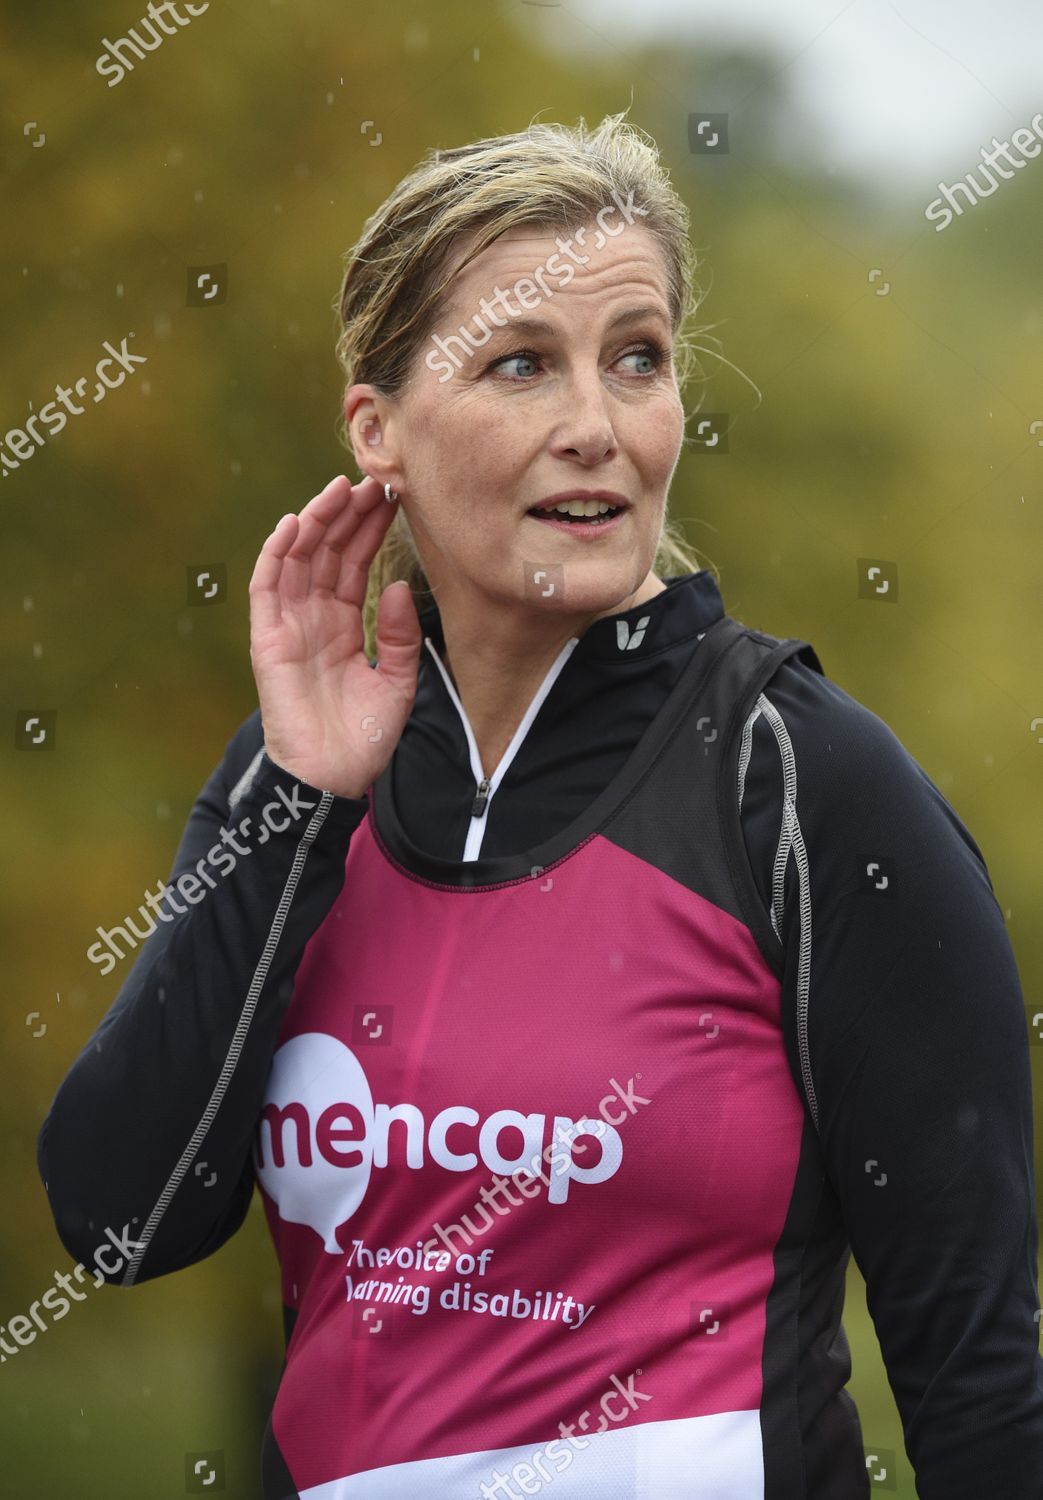 sophie-countess-of-wessex-joins-with-mencaps-learning-disability-running-team-windsor-uk-shutterstock-editorial-10876999z.jpg